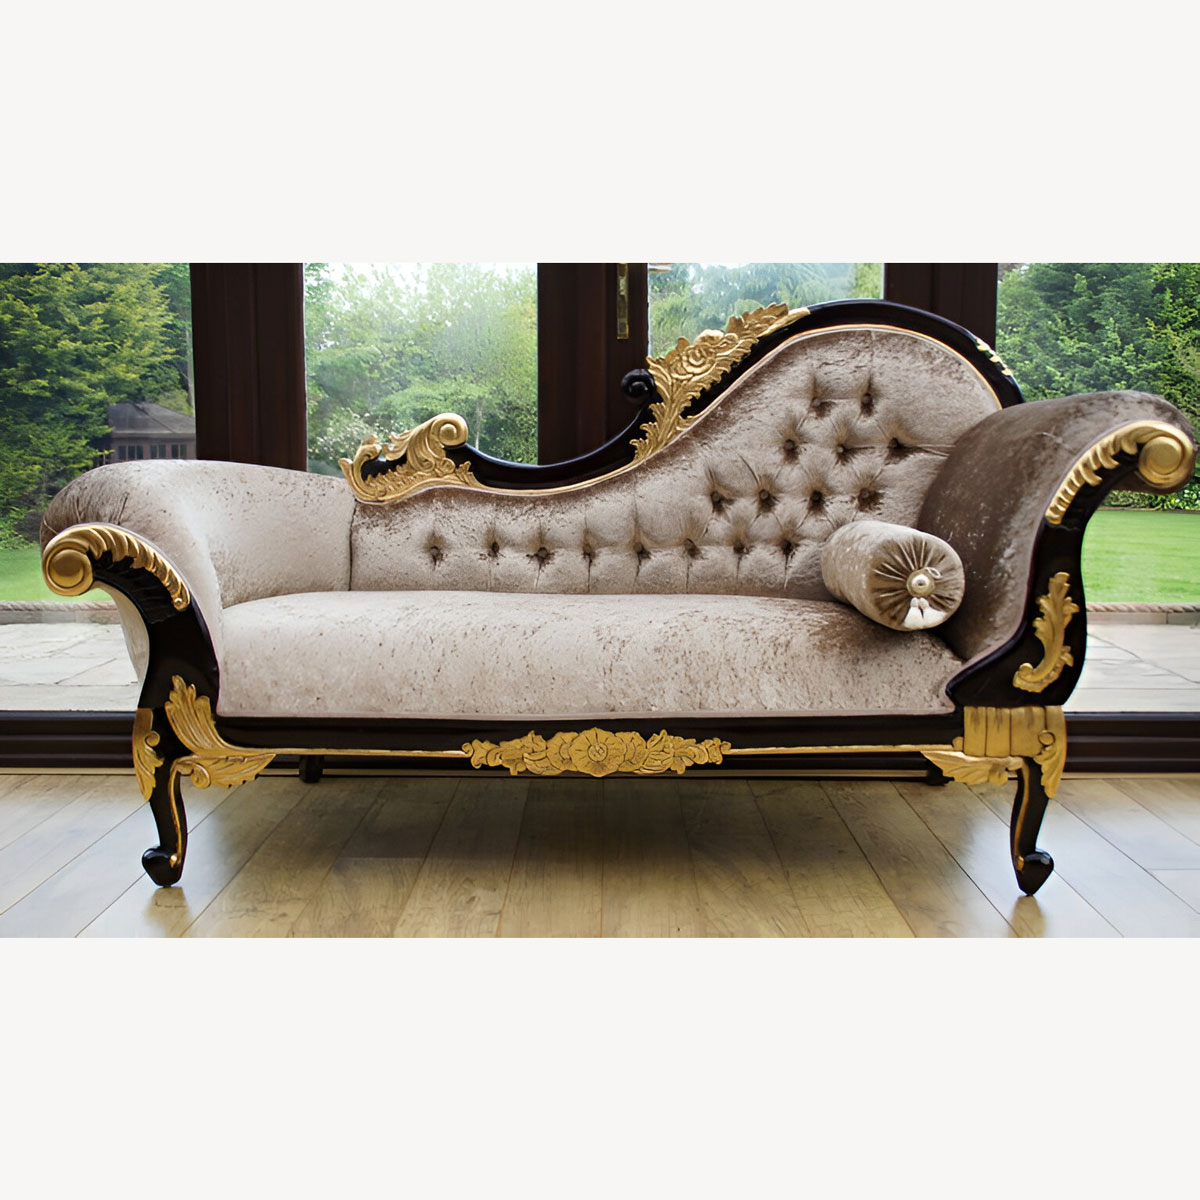 Gold Leaf And Mahogany Hampshire Chaise Medium Size Shown In A Mink Coloured Crushed Velvet 1 - Hampshire Barn Interiors - Gold Leaf And Mahogany Hampshire Chaise Medium Size Shown In A Mink Coloured Crushed Velvet -